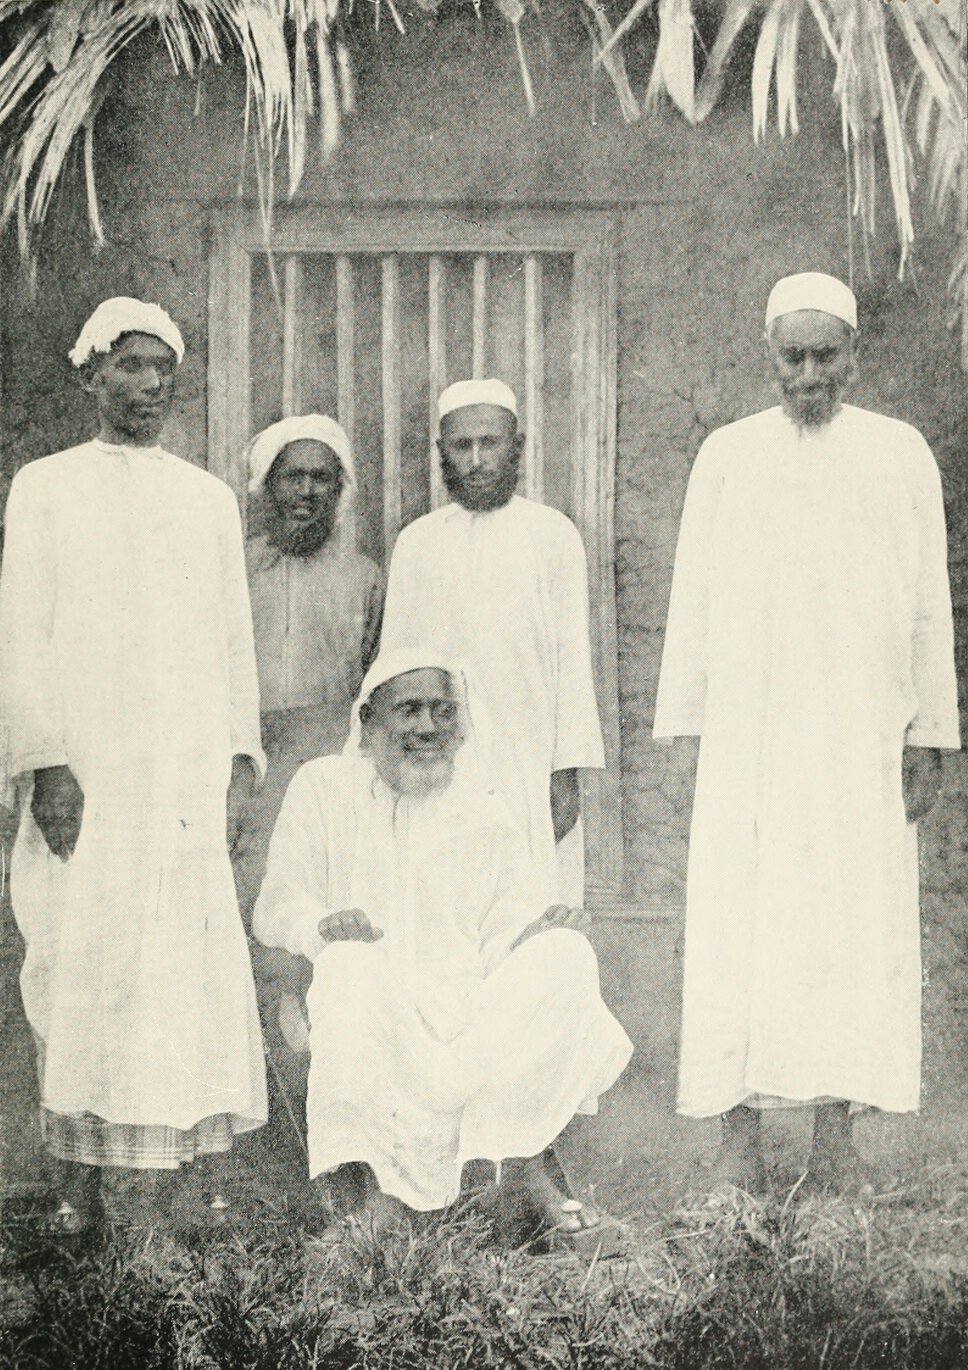 Tippu Tip seated and surrounded by four individuals, all of whom are standing.